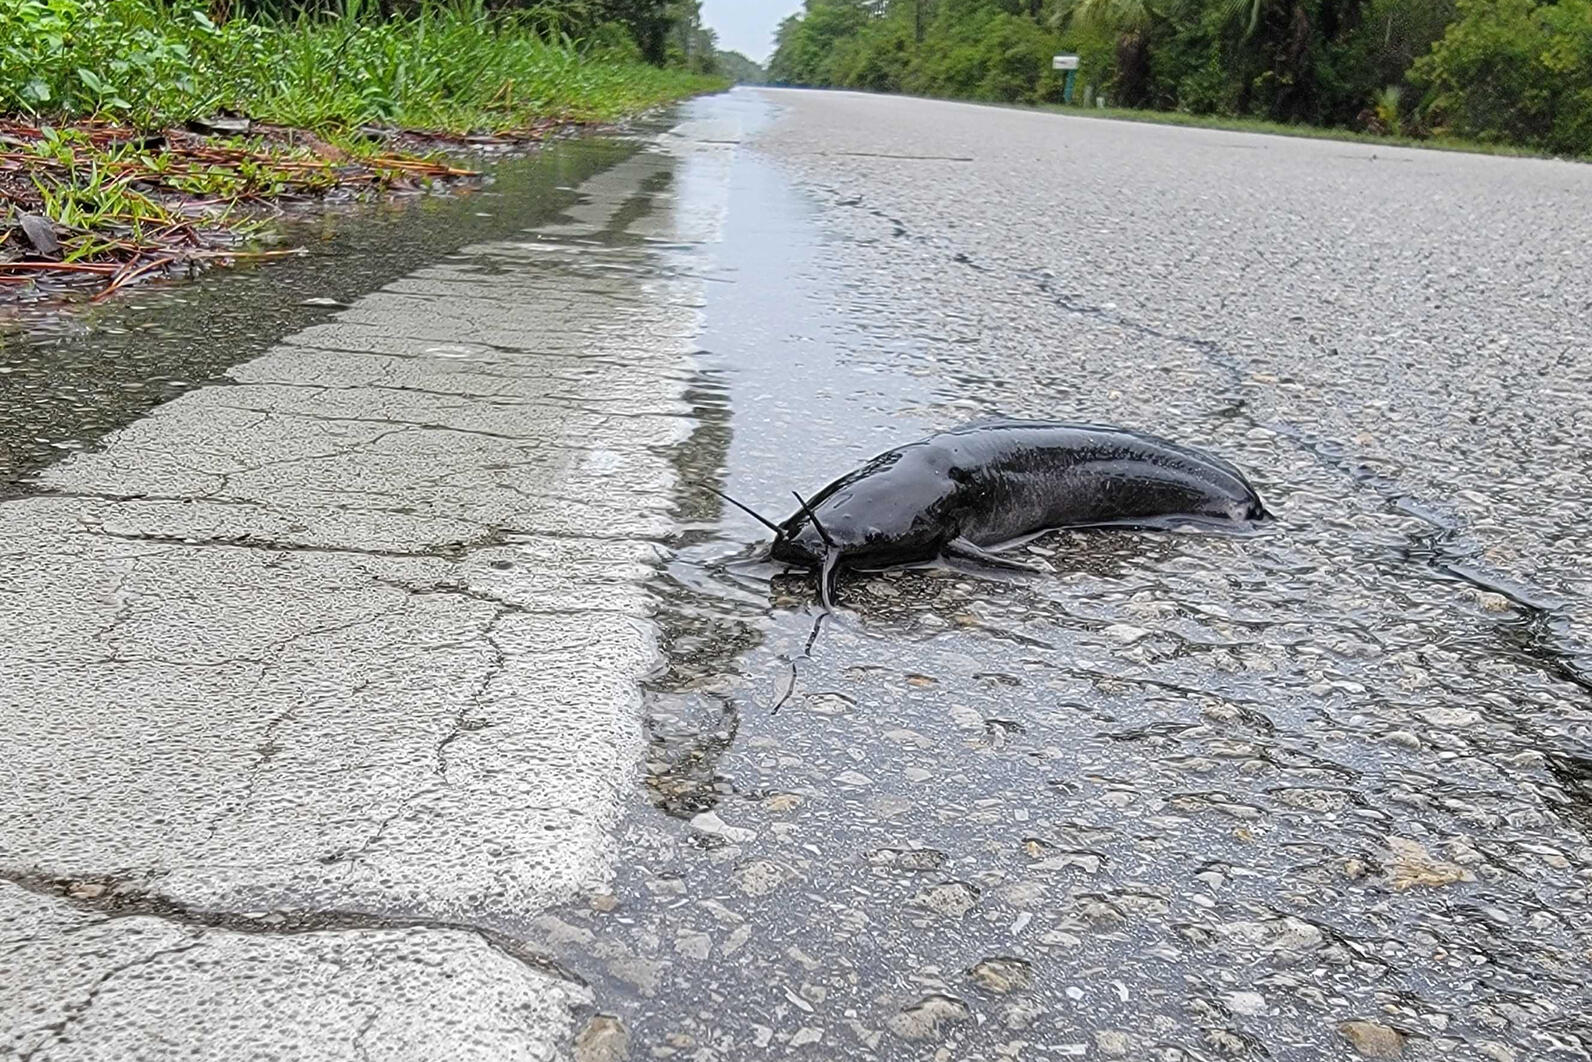 Close-up of a fish on a road